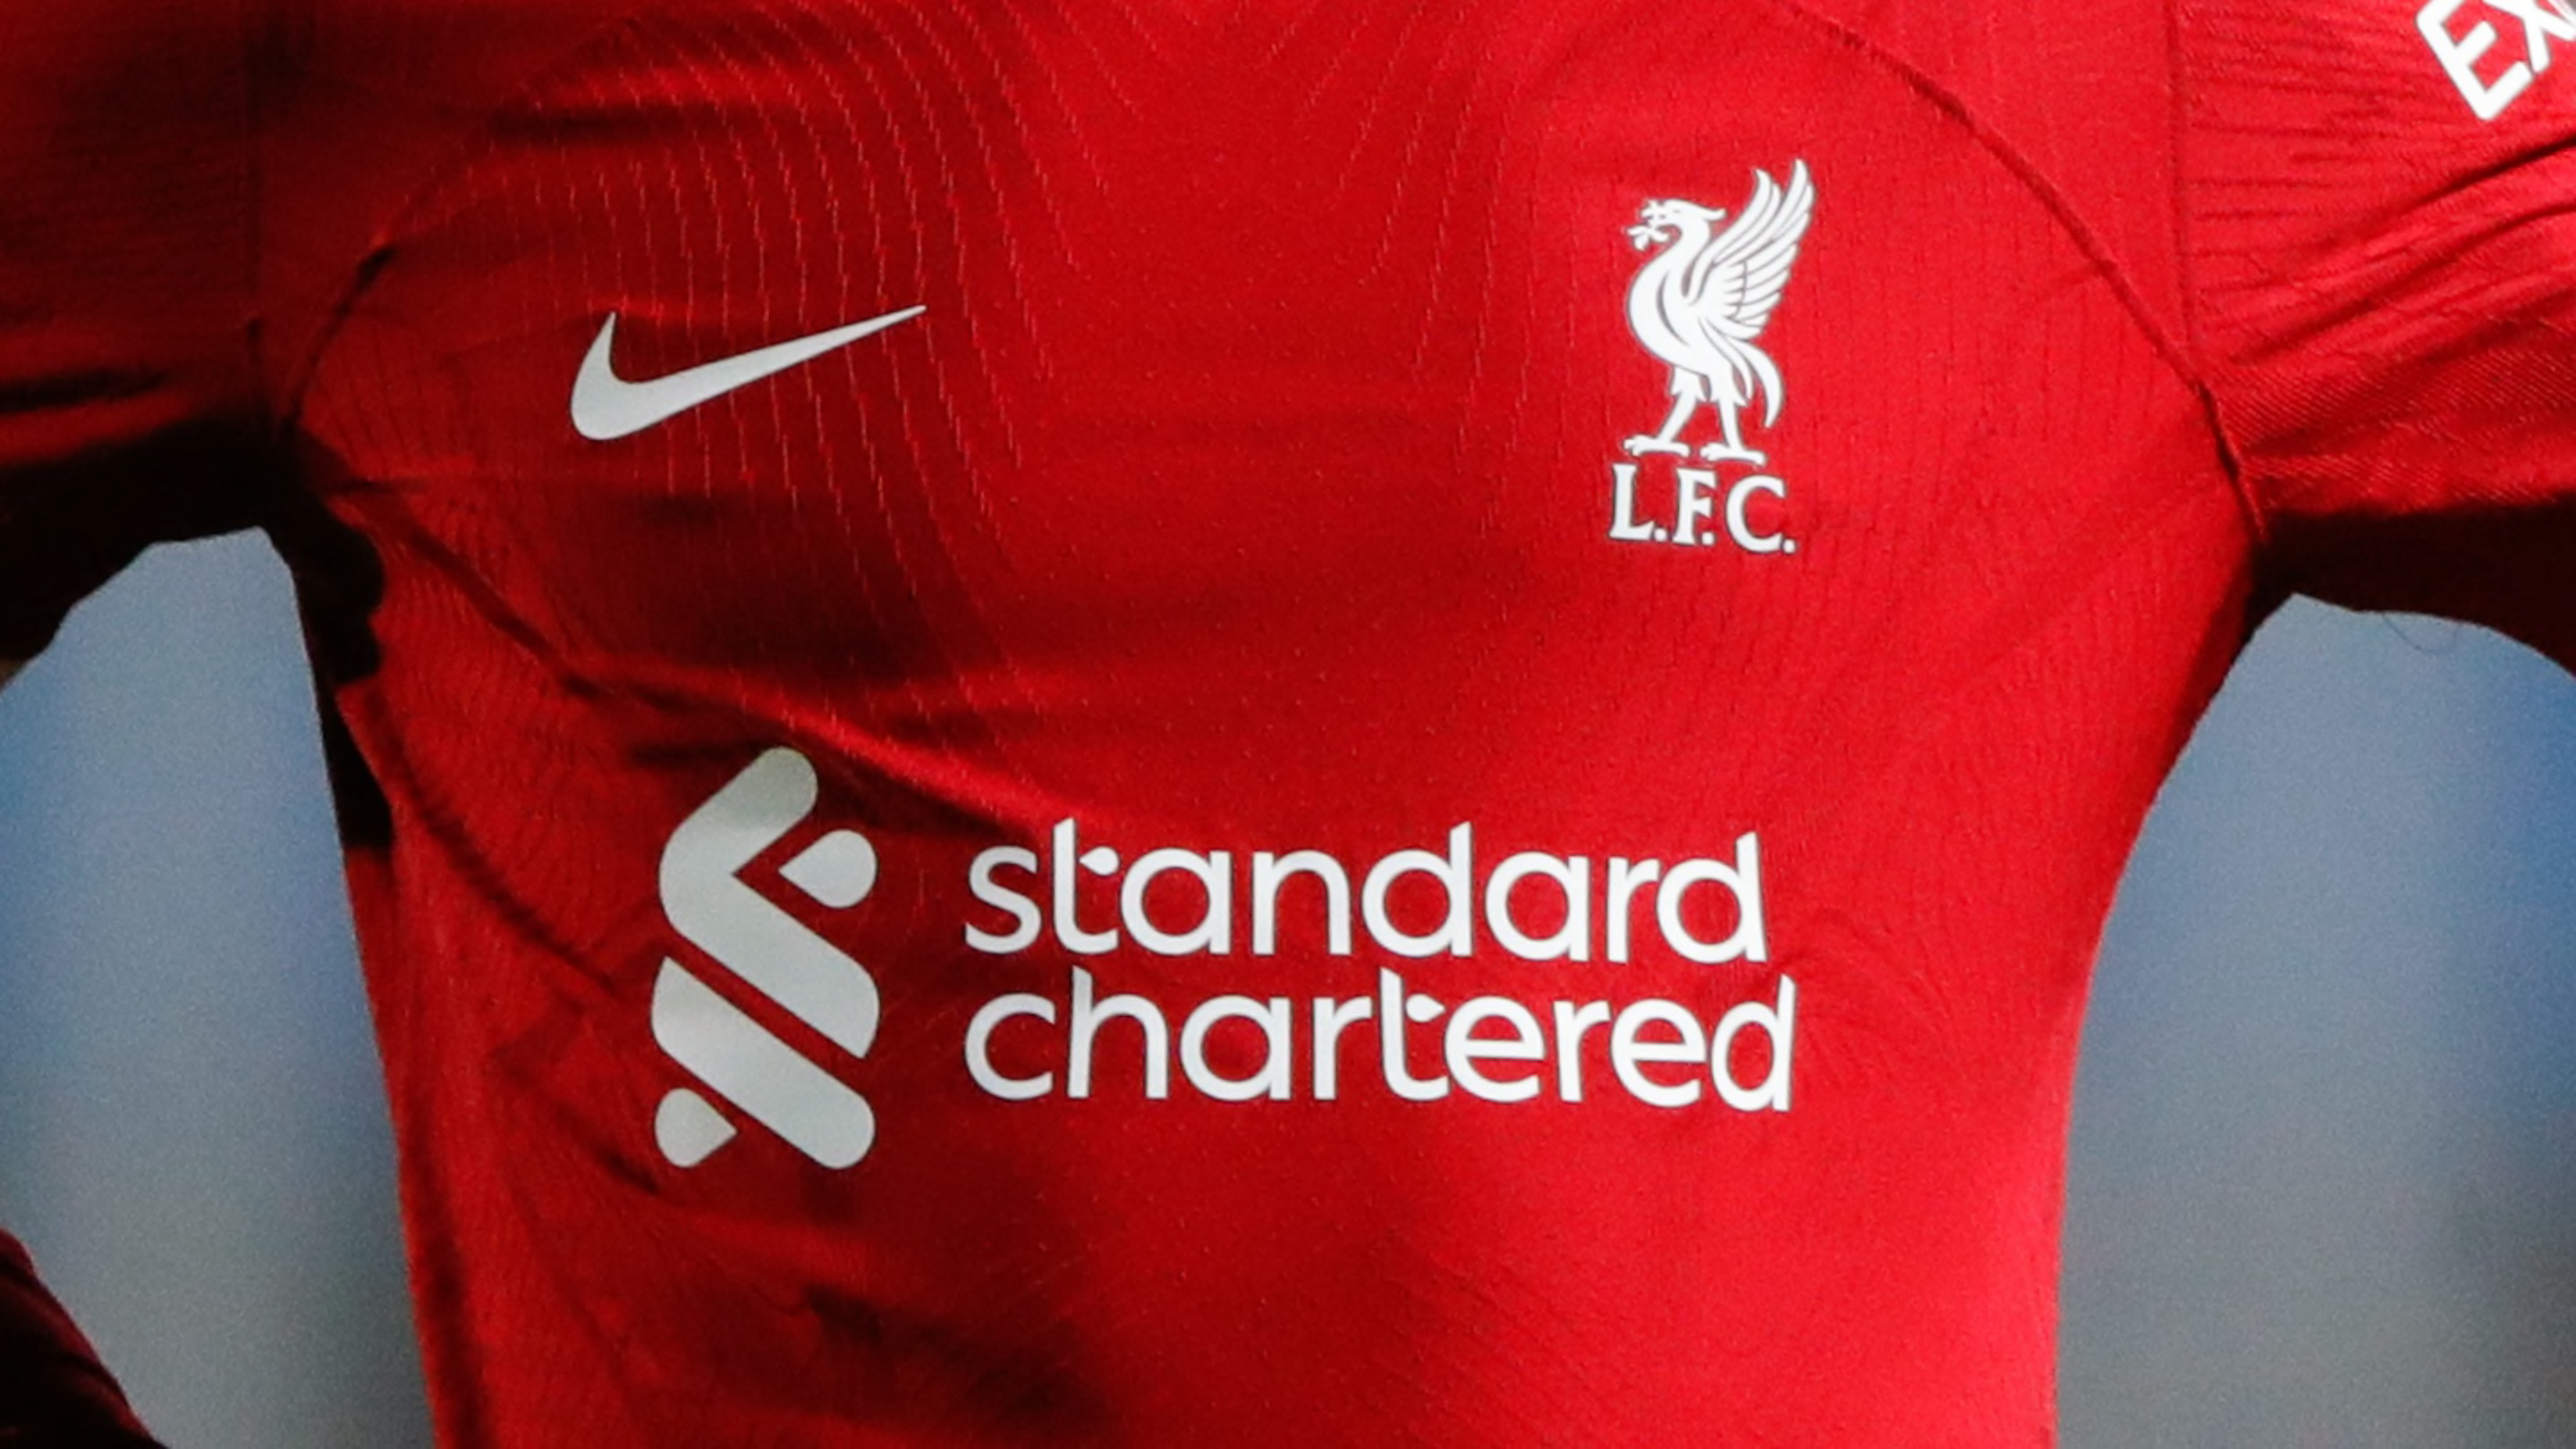 Liverpool to switch kit suppliers from Nike in 2025 - report